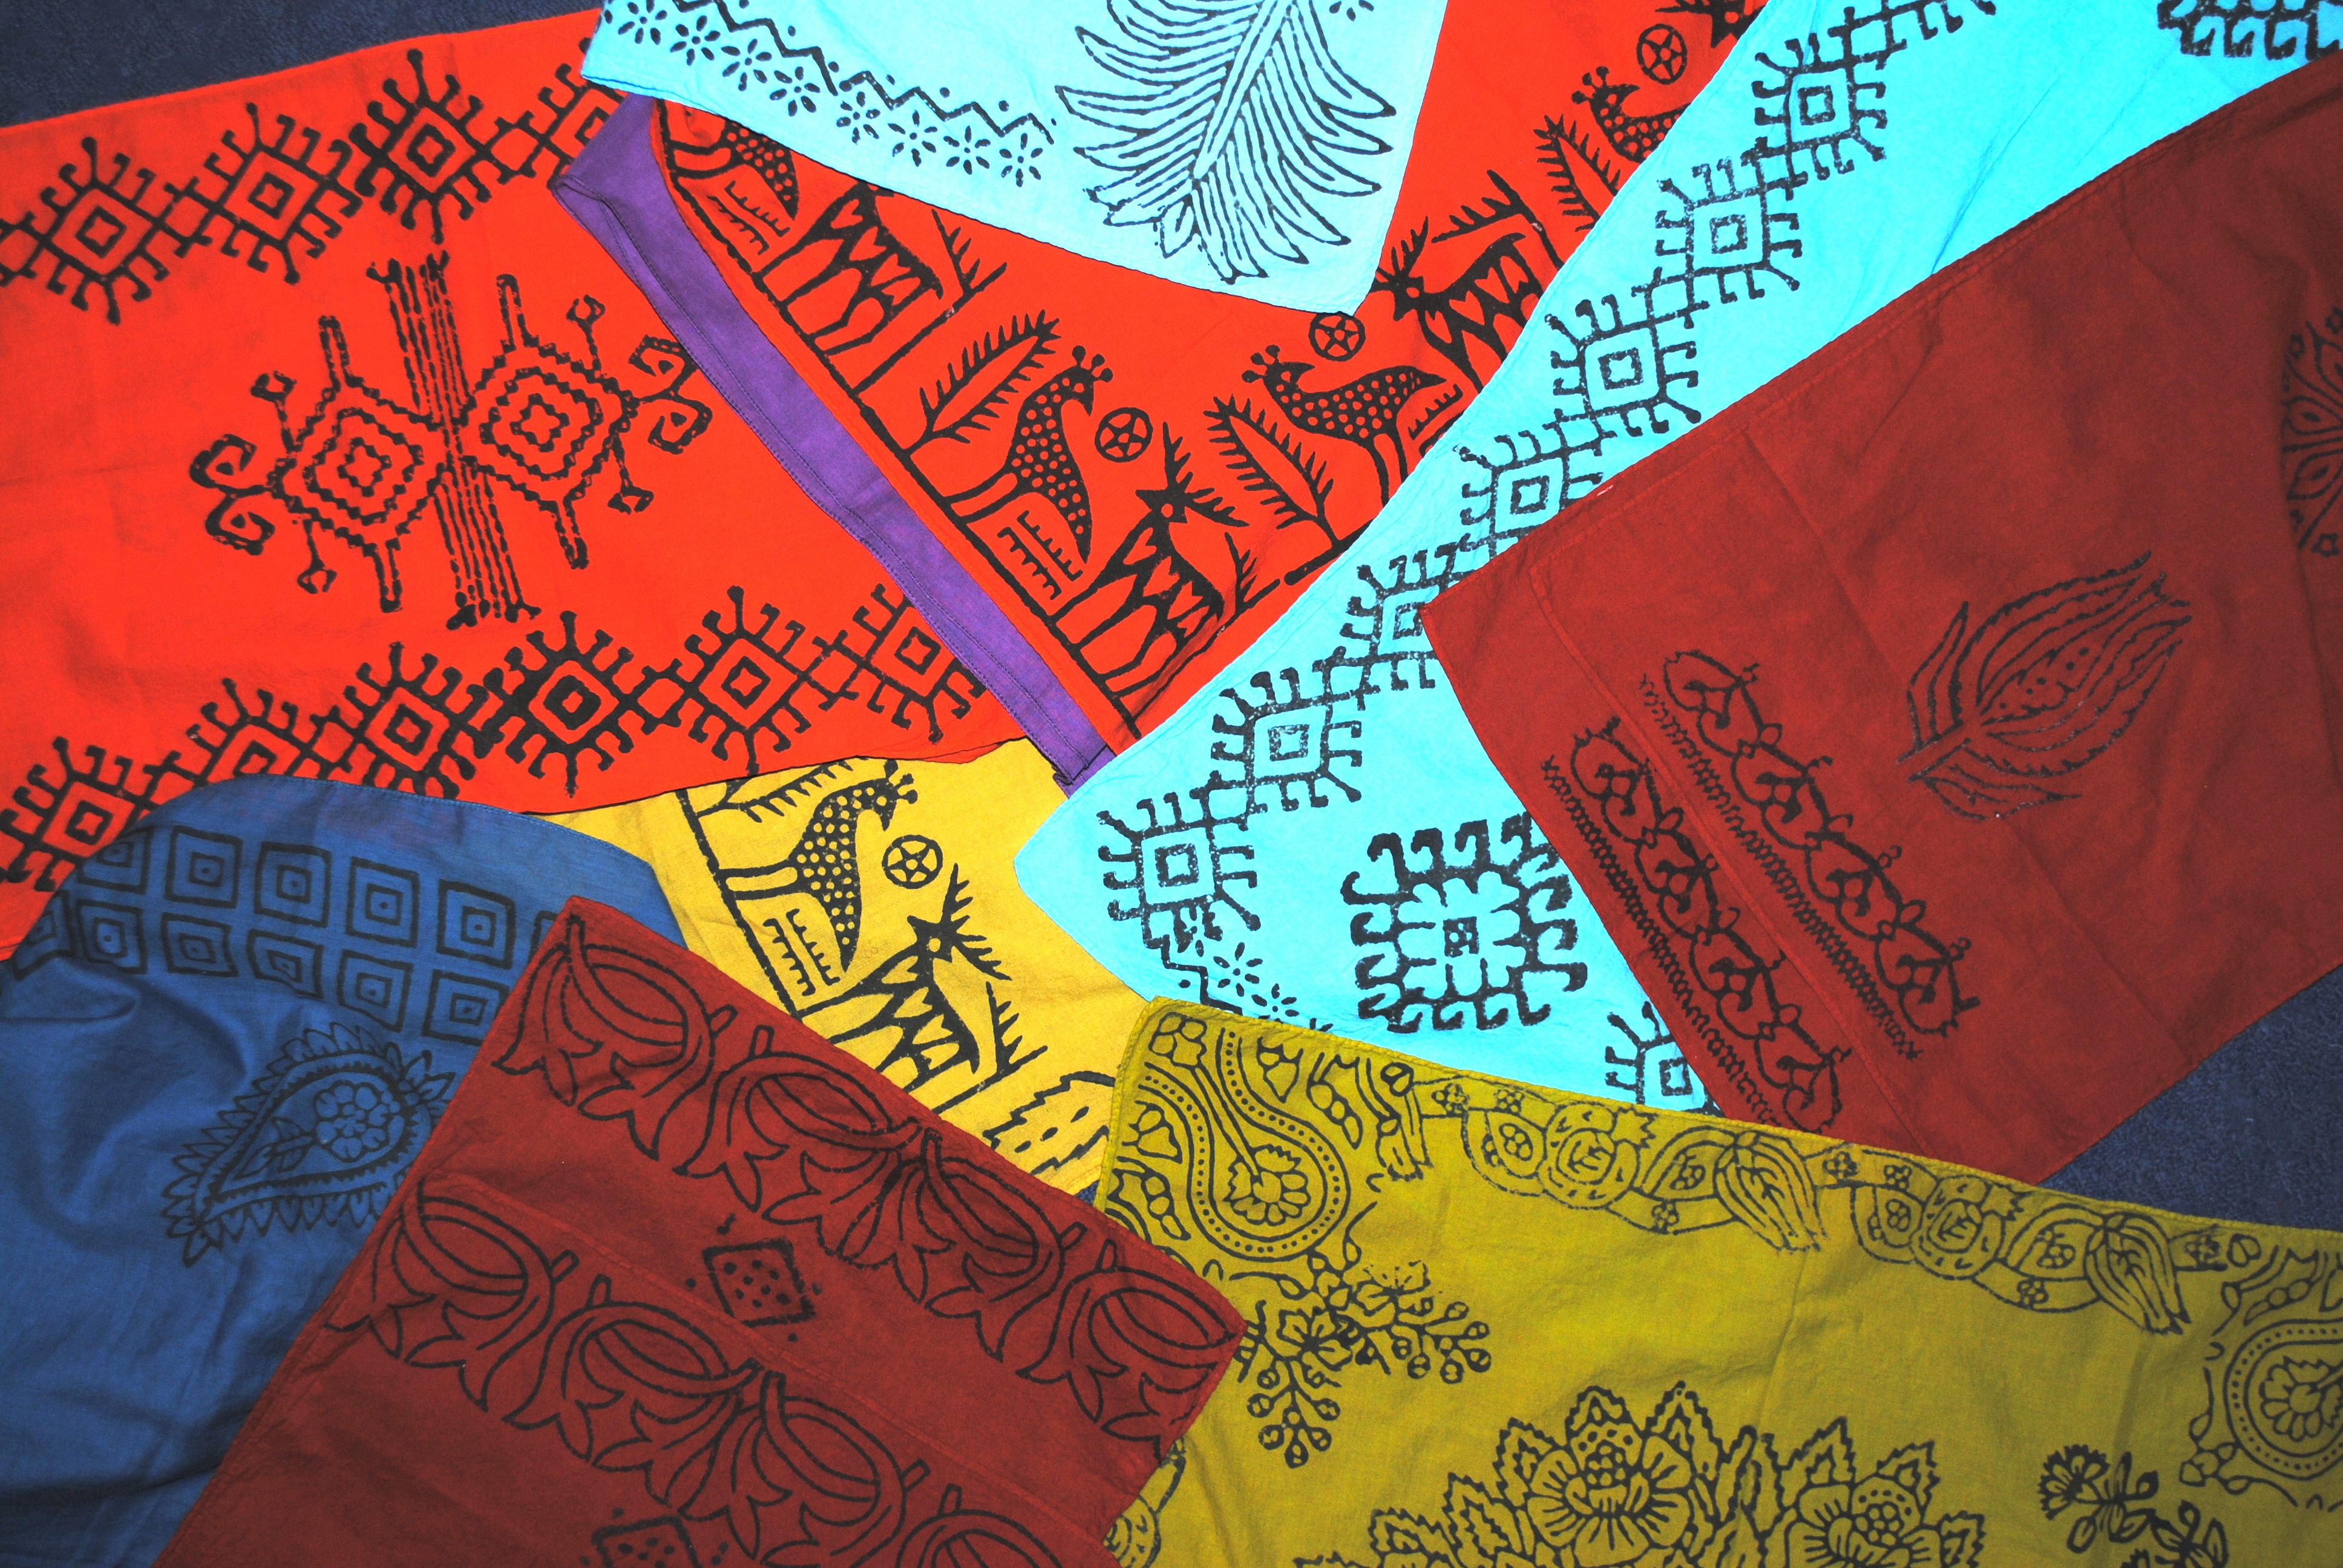 Hand-block printed scarves crated by 2011 group.